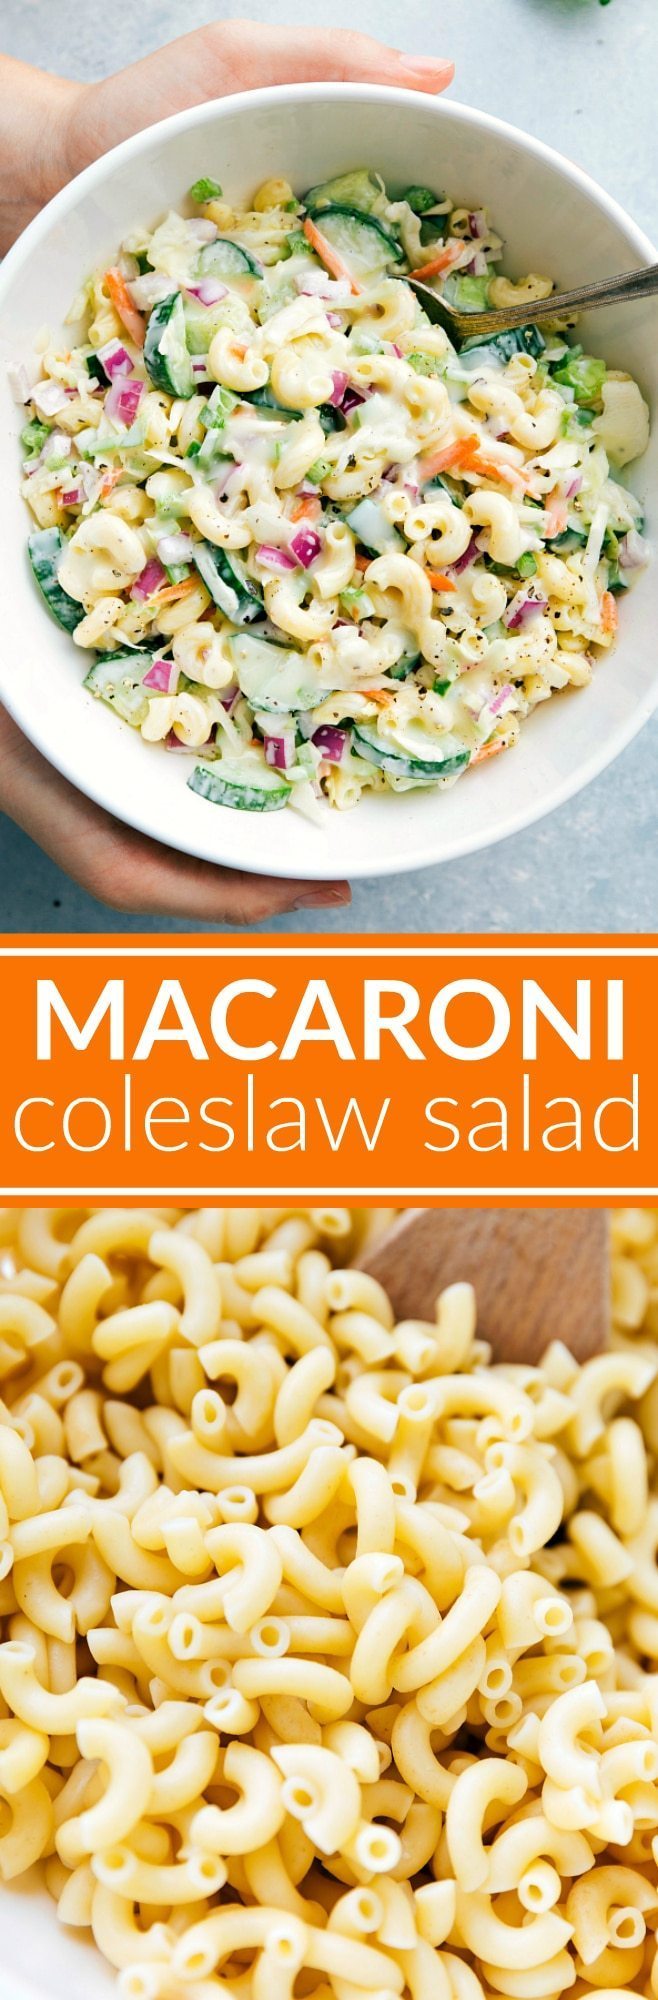 MACARONI COLESLAW SALAD I Two amazing summer side-dishes collide into one insanely tasty Macaroni Coleslaw Salad! Perfect for a potluck or summer get-together! I chelseasmessyapron.com